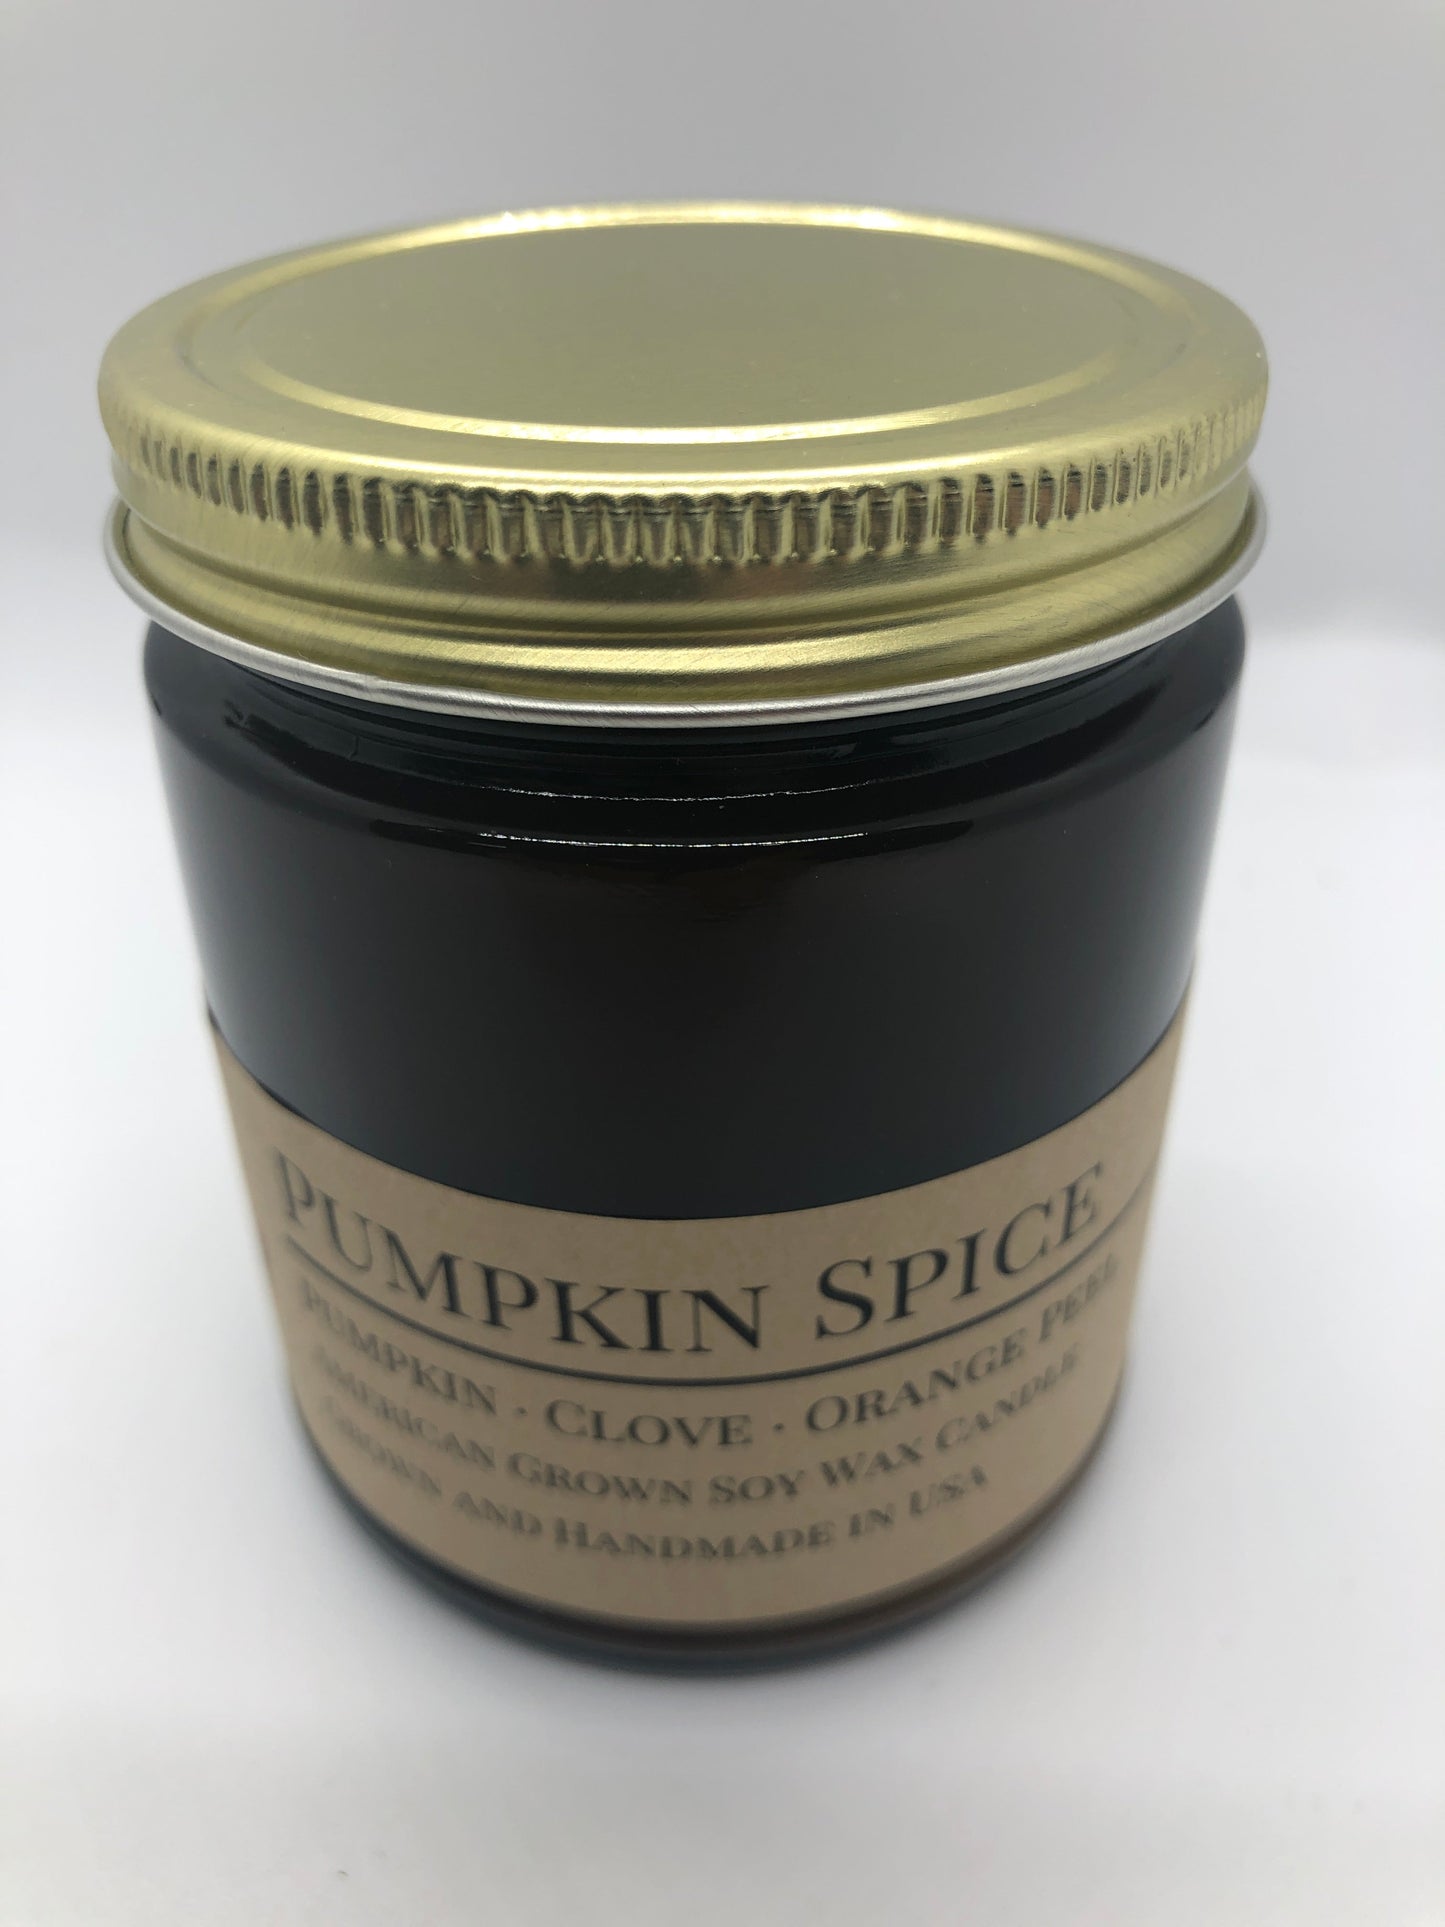 Pumpkin Spice Soy Candle | 9 oz Amber Apothecary Jar